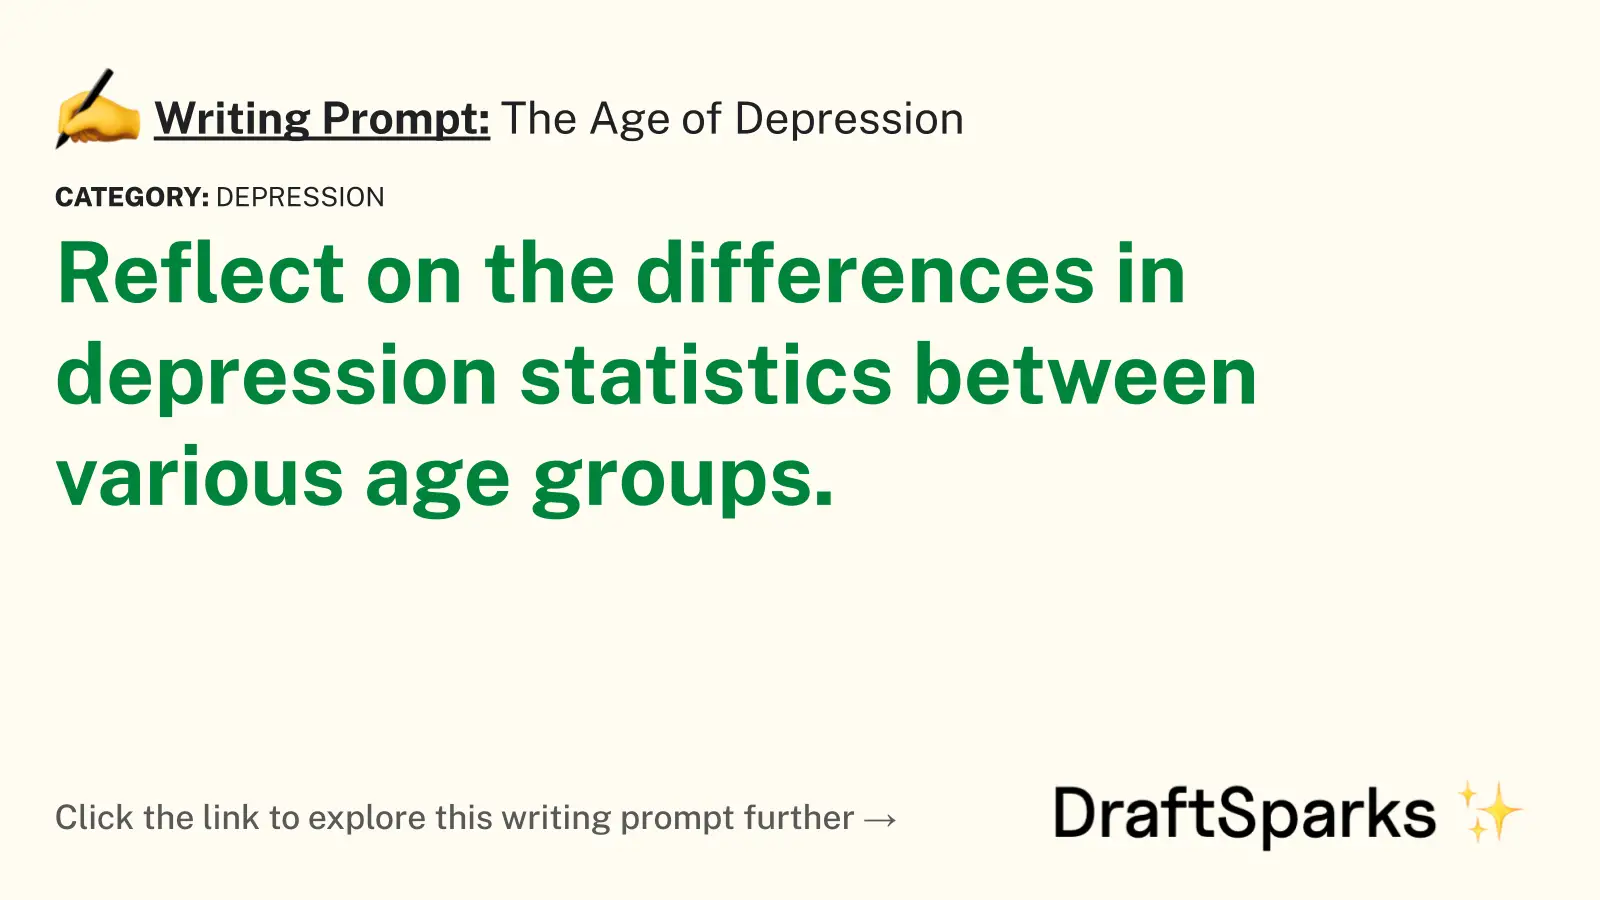 The Age of Depression